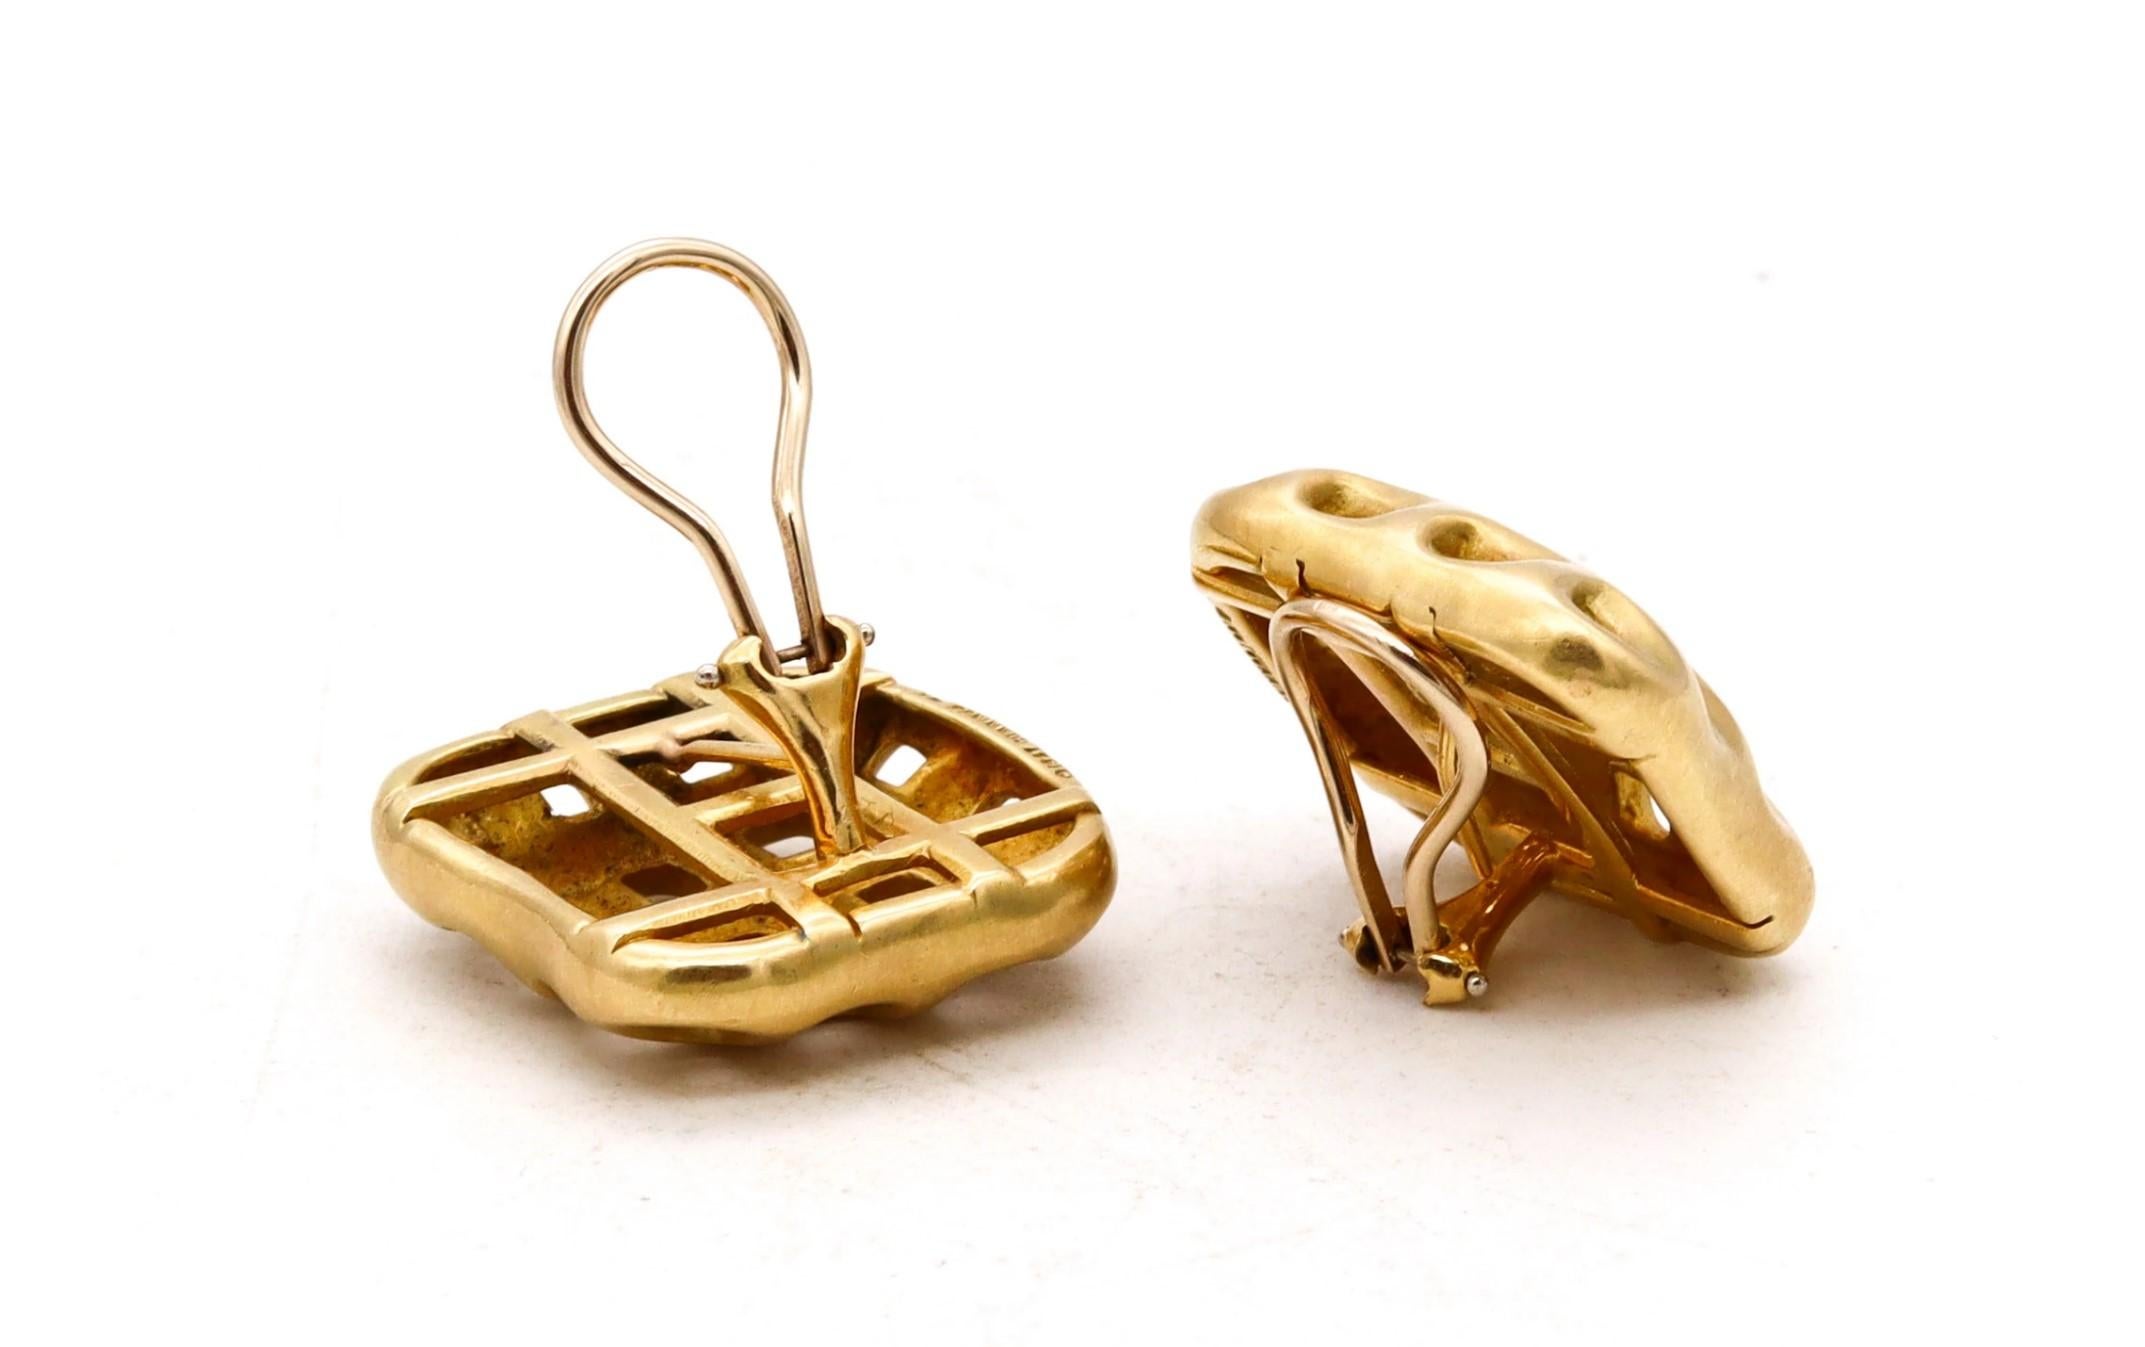 Modernist Angela Cummings 1987 New York Studios Perforations Earrings In Solid 18Kt Gold For Sale